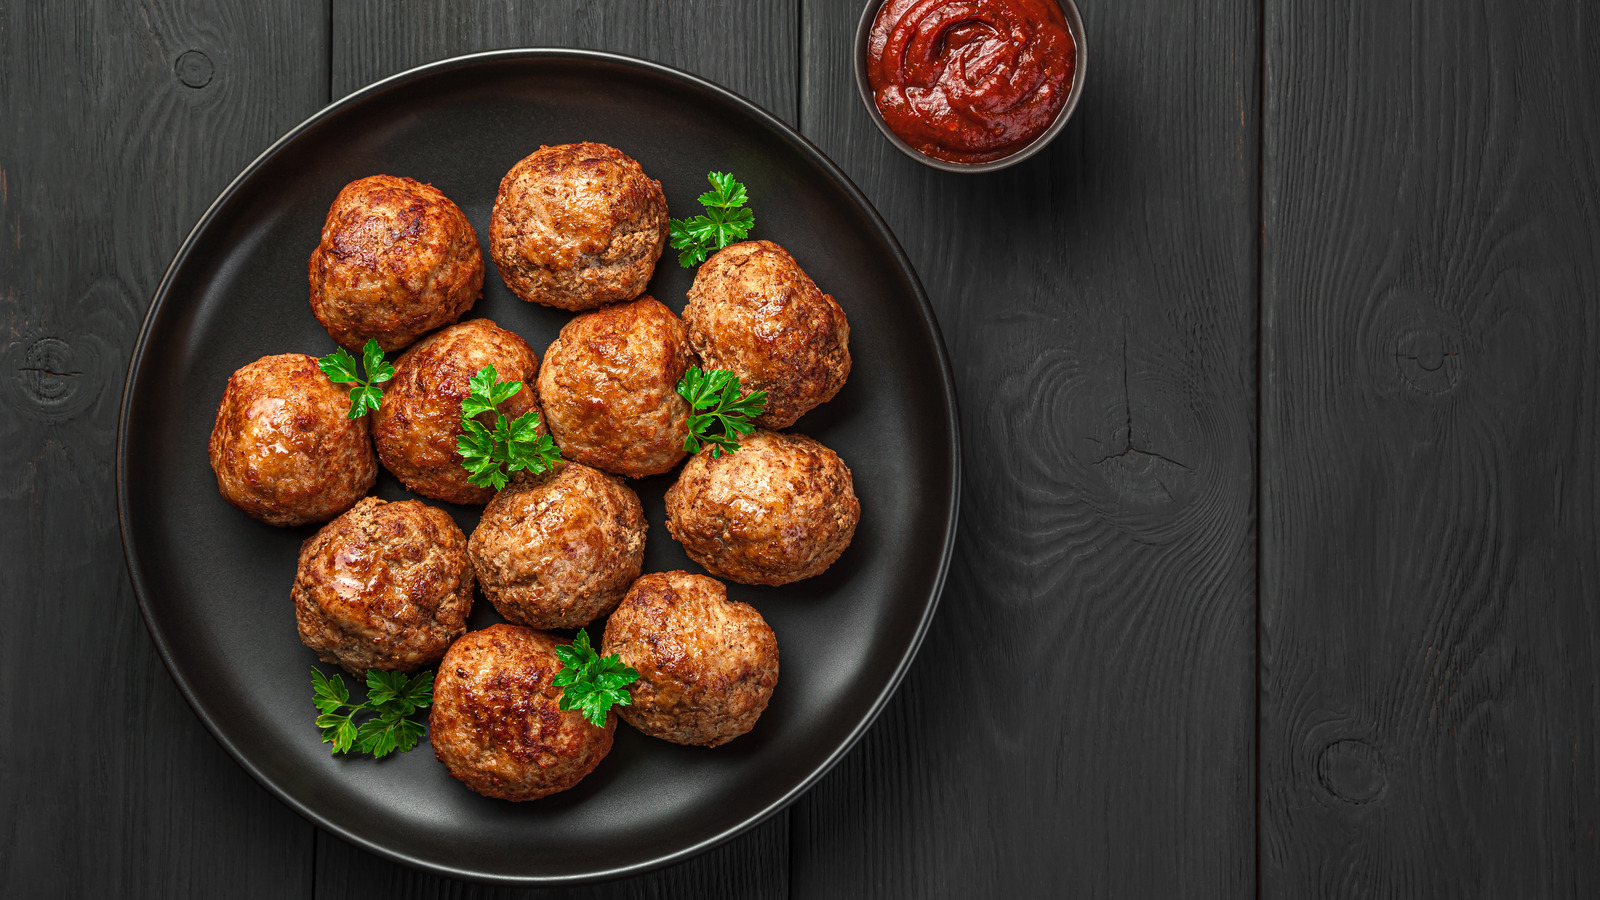 The Common Mistake That's Killing Your Poor Meatballs